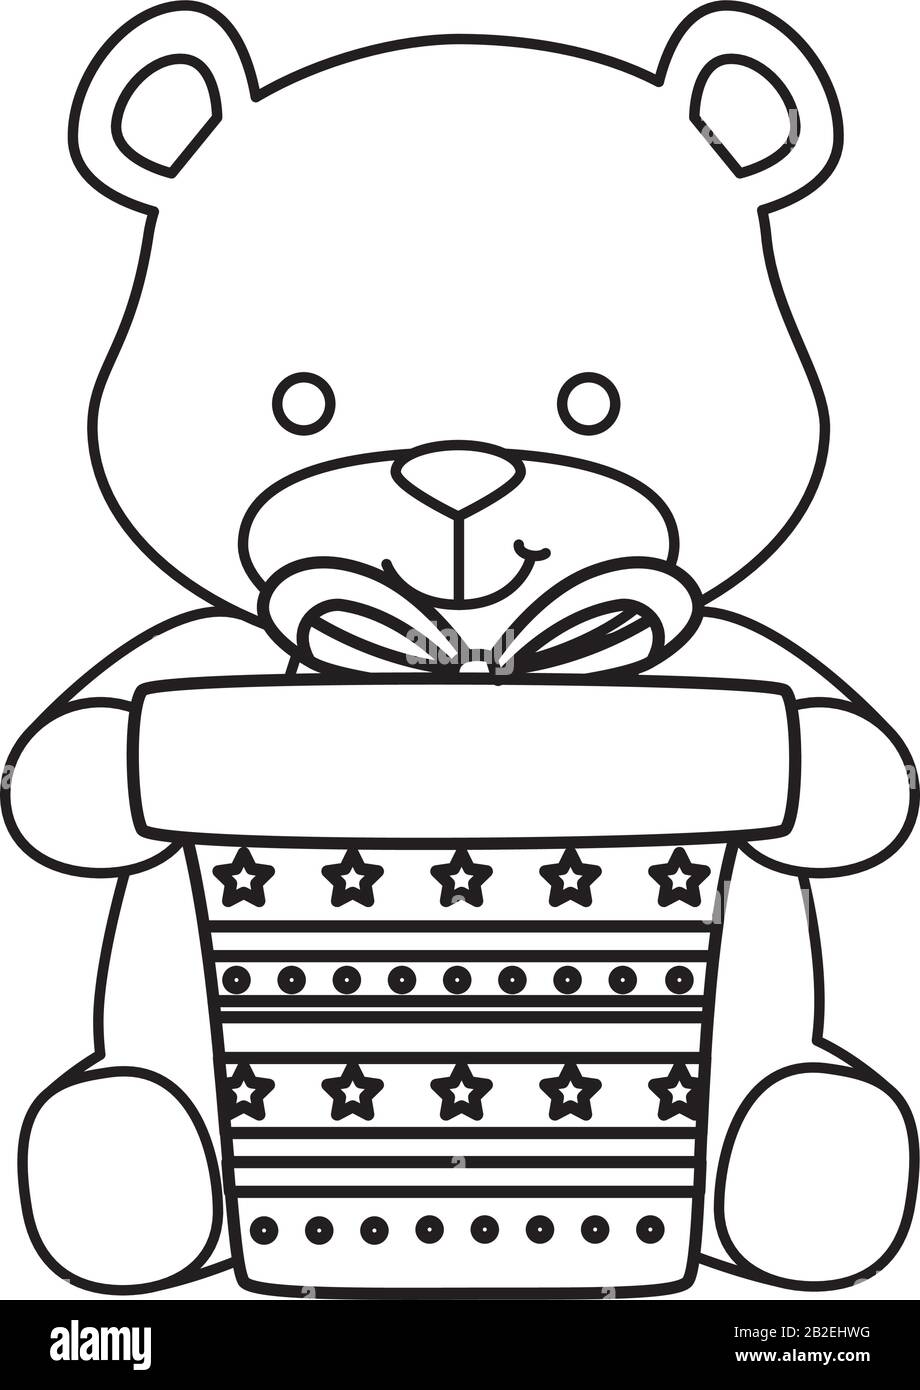 cute teddy bear with gift box present isolated icon Stock Vector